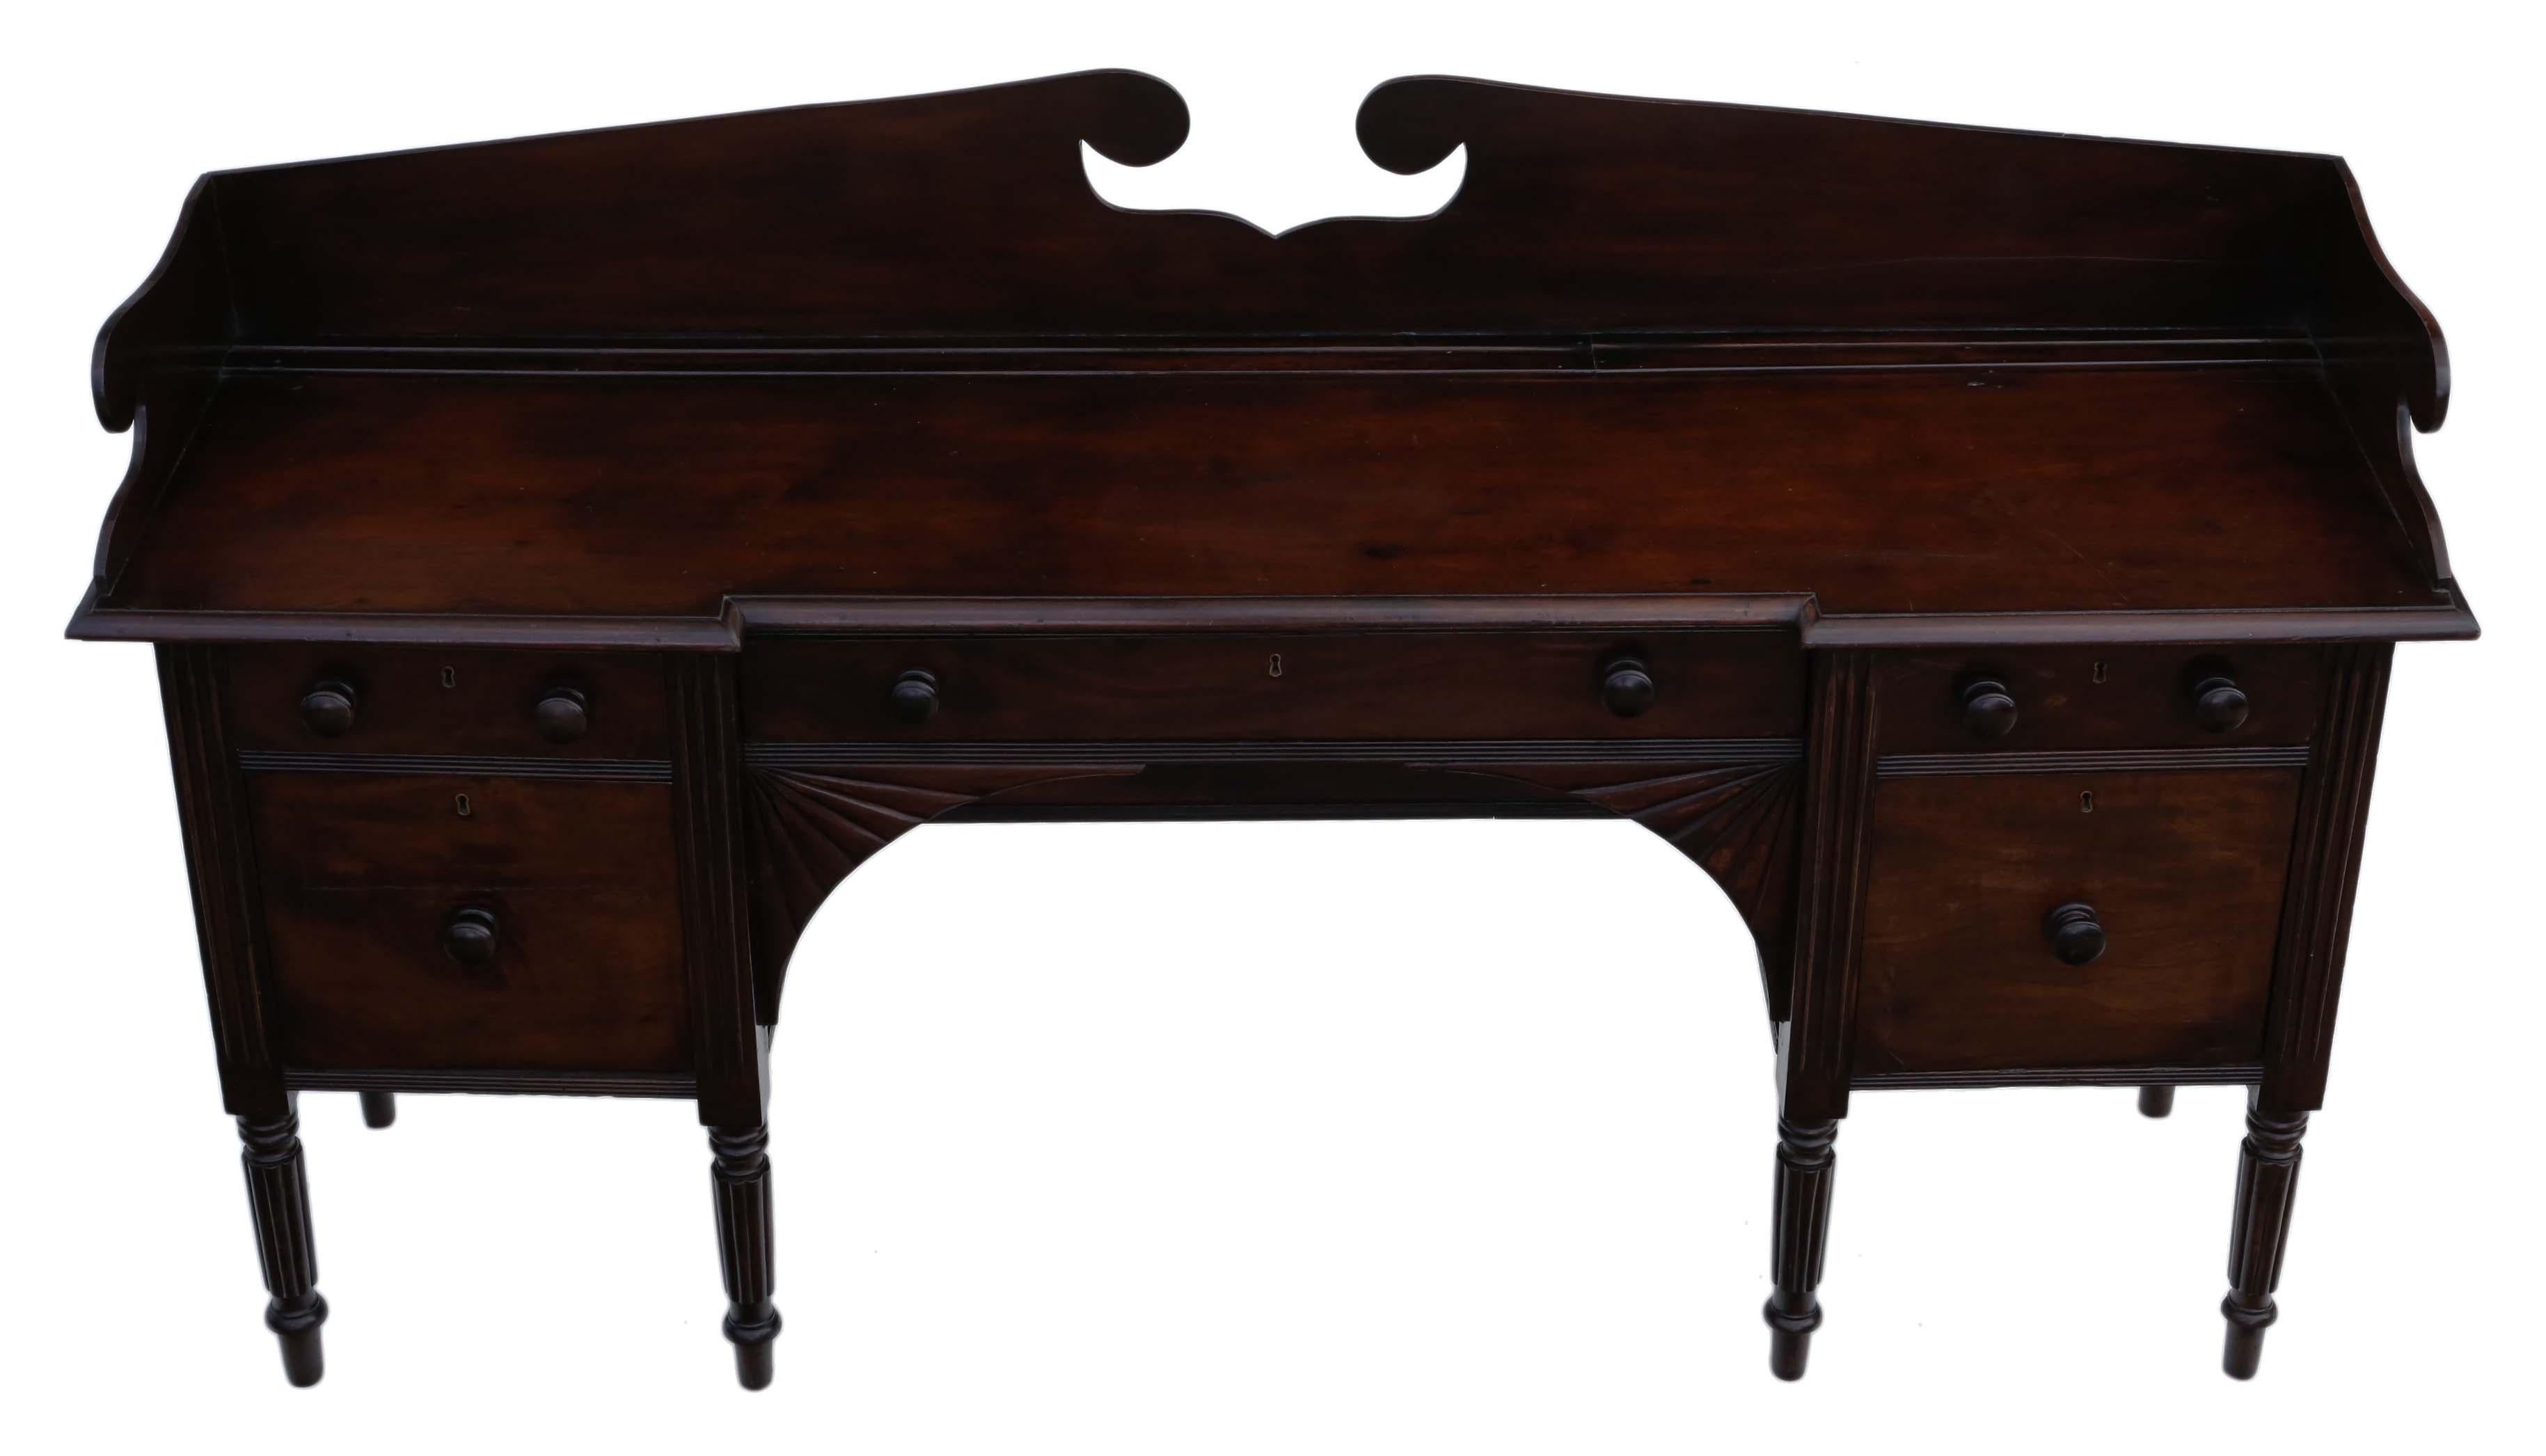 Antique large Regency / William IV flame mahogany sideboard chiffonier.
An attractive and rare piece of furniture dating from circa 1825-1835.
Full of age charm and character.
Note that this is a large one-piece item for transport.
A good, solid